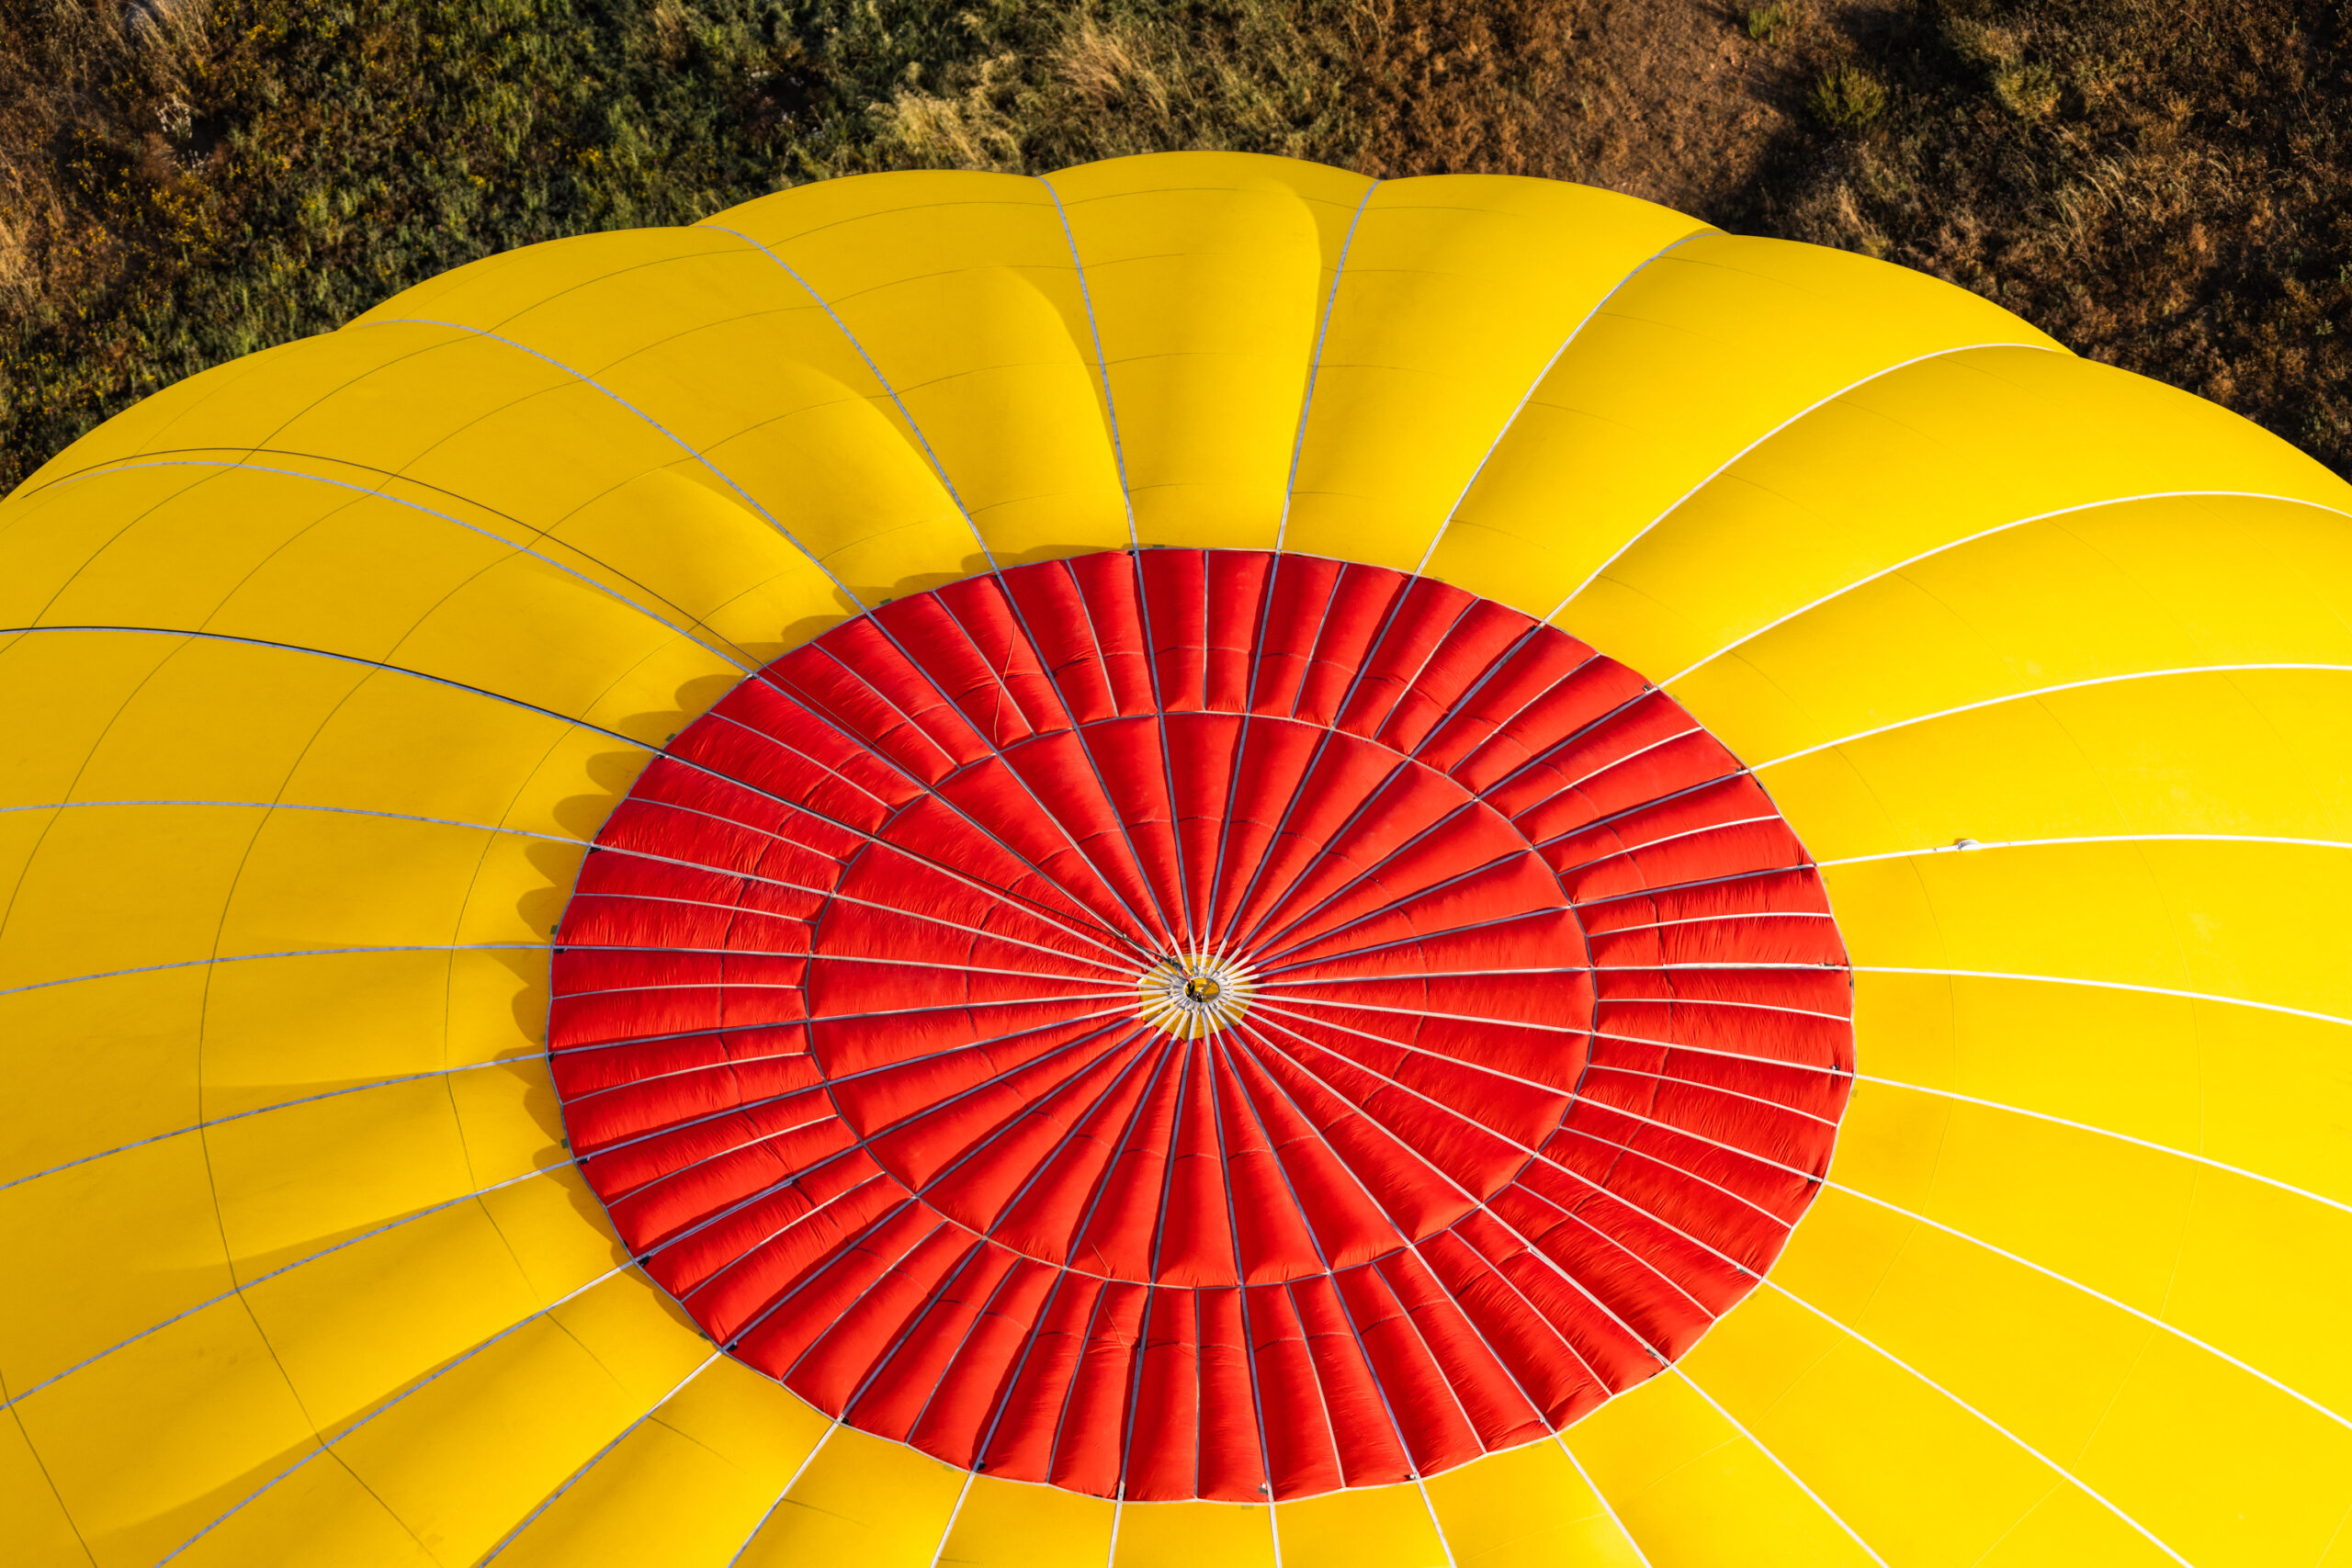 View of the top of another balloon as we pass overhead